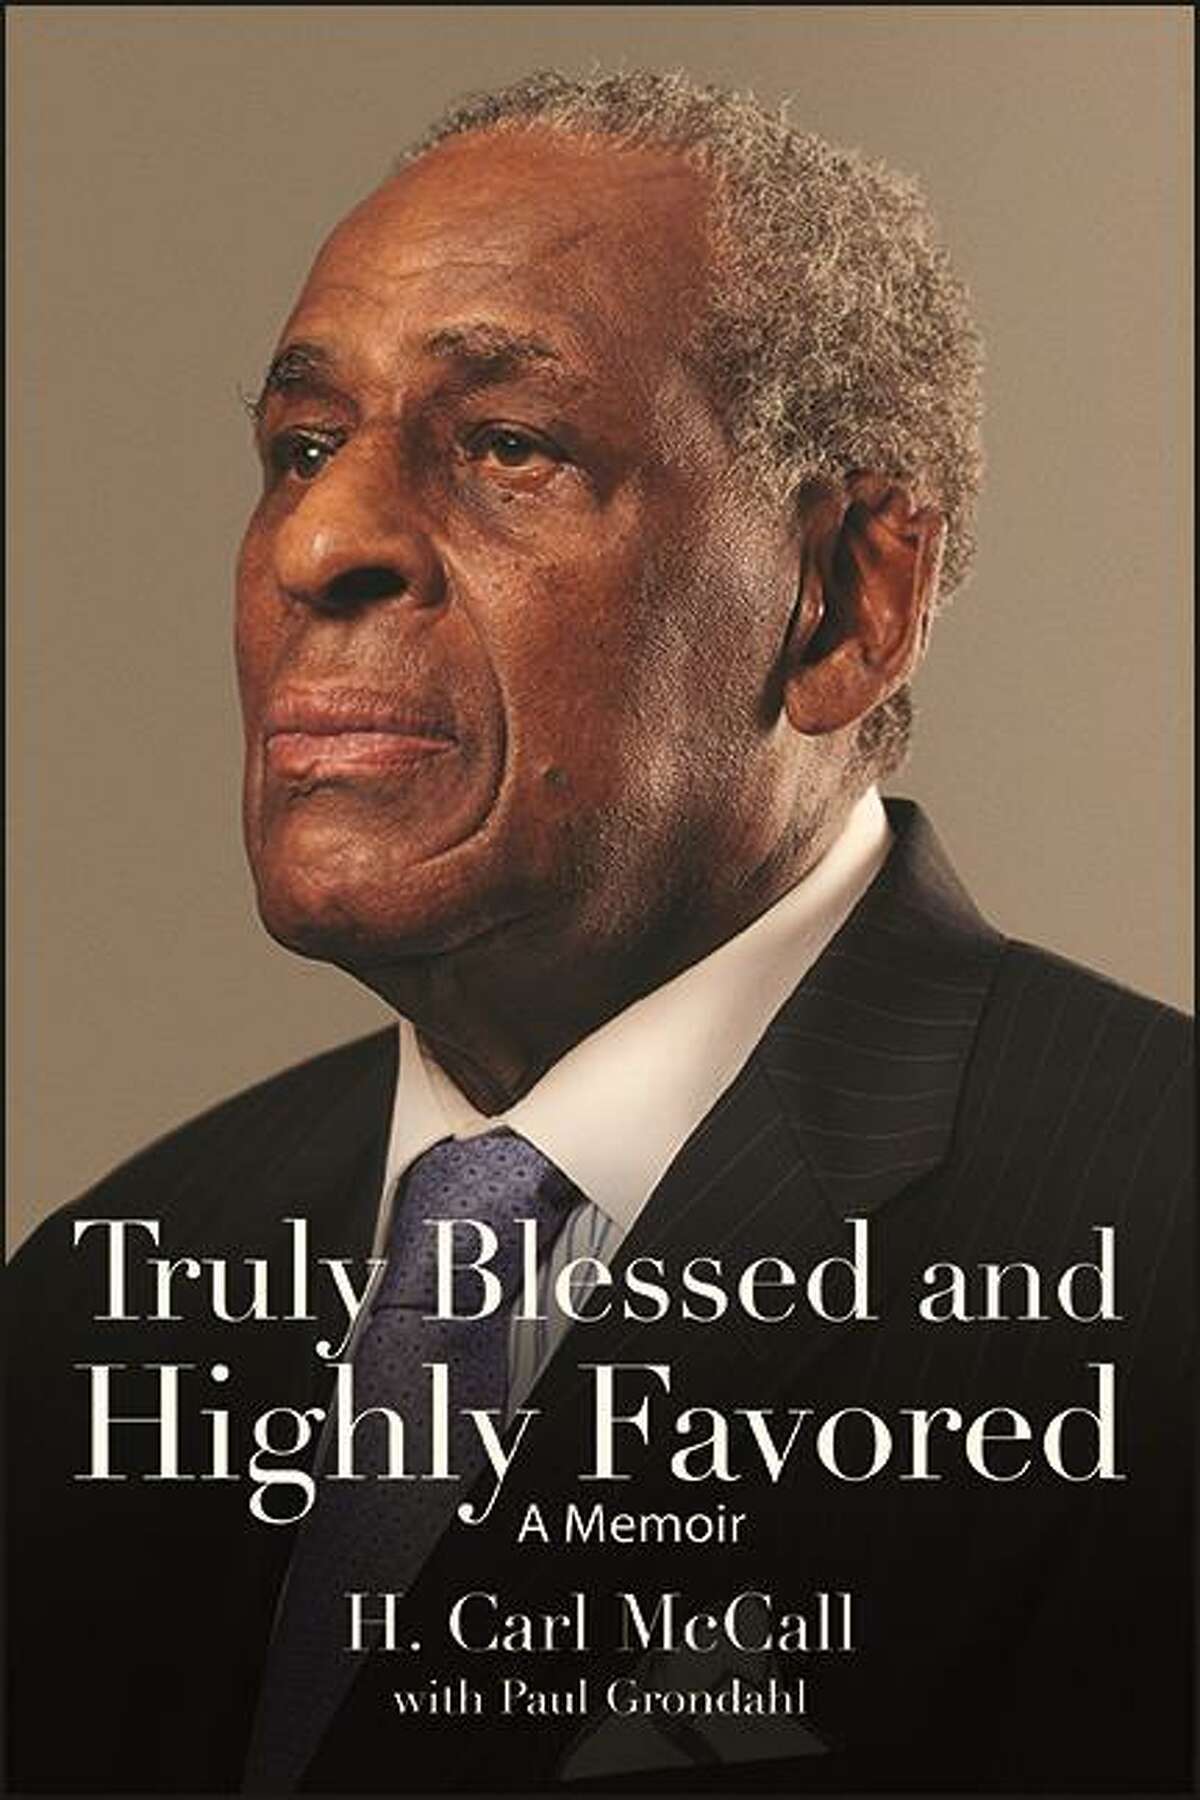 "Truly Blessed and Highly Favored: A Memoir" by H. Carl McCall with Paul Grondahl.